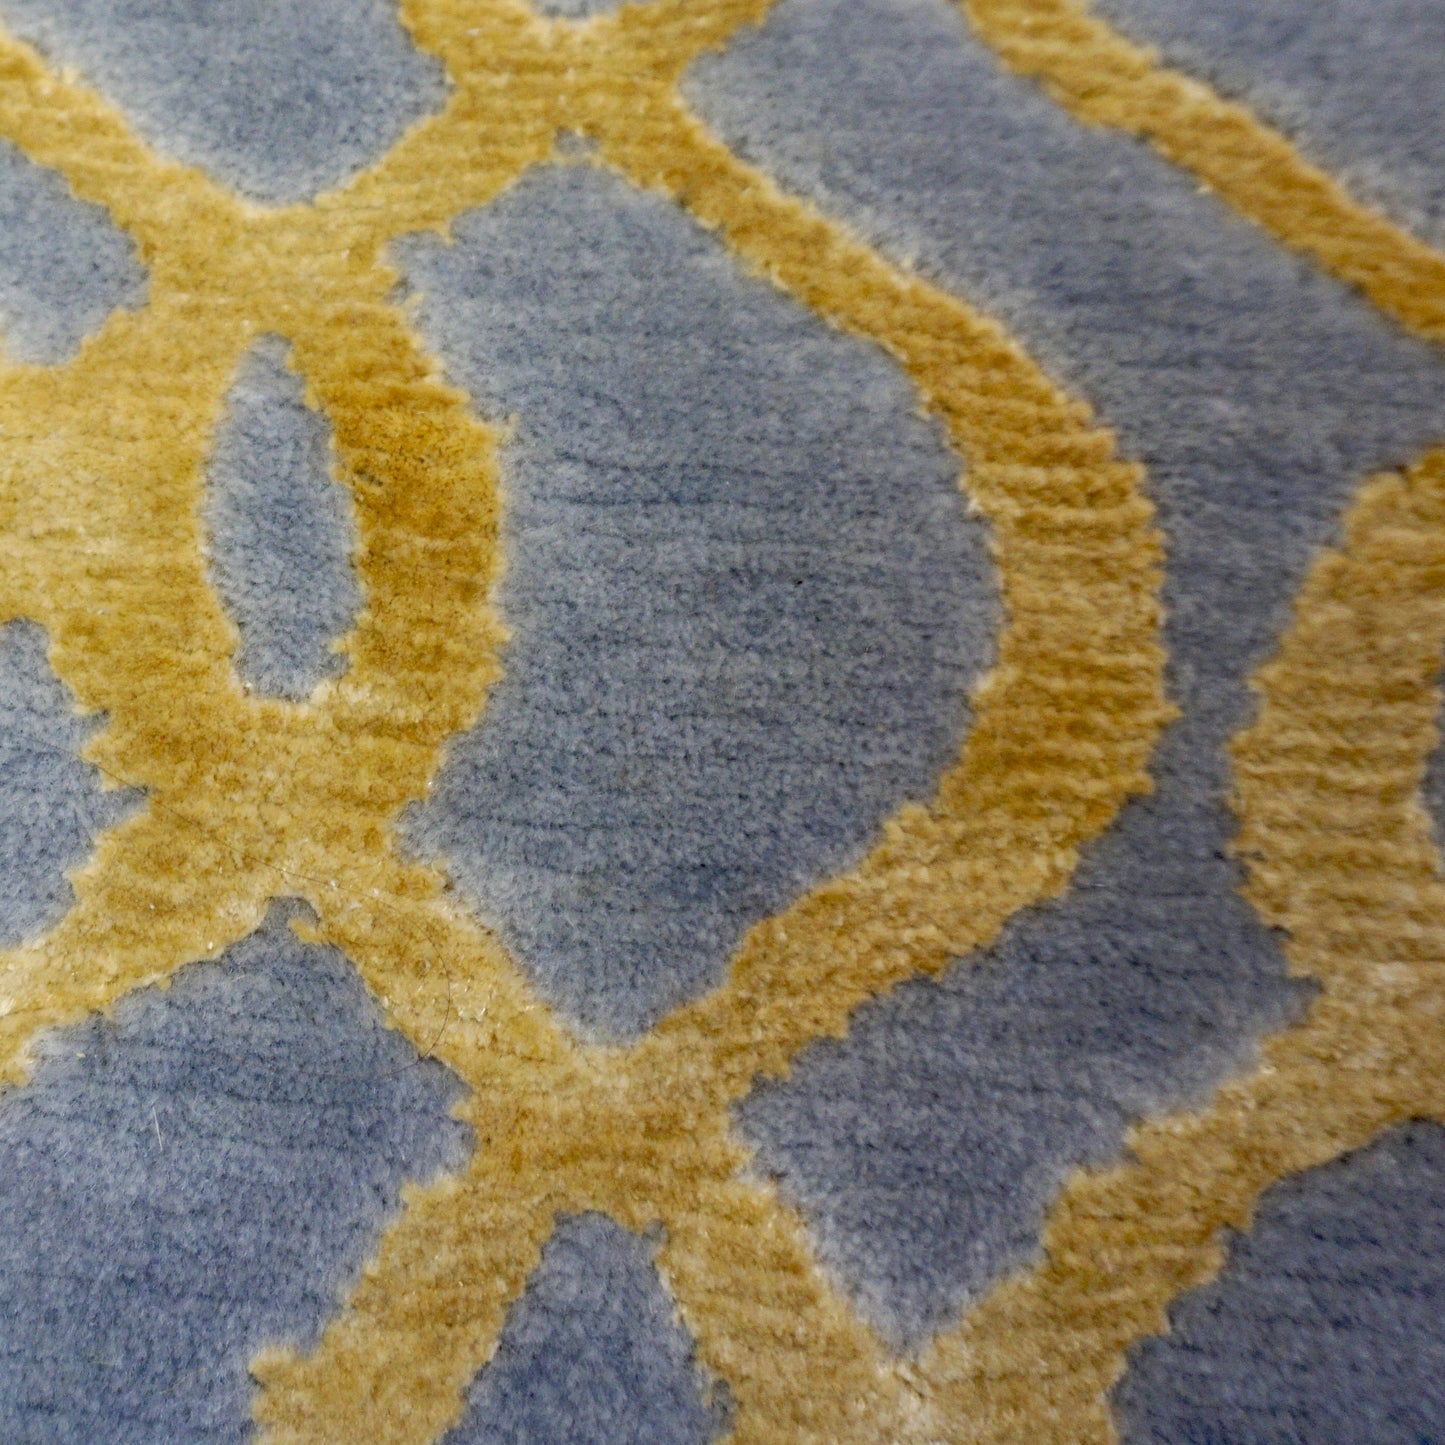 Gold and Silver Blue Gray Modern Indian Rug With Organic Geometric Design - Cosulich Interiors & Antiques